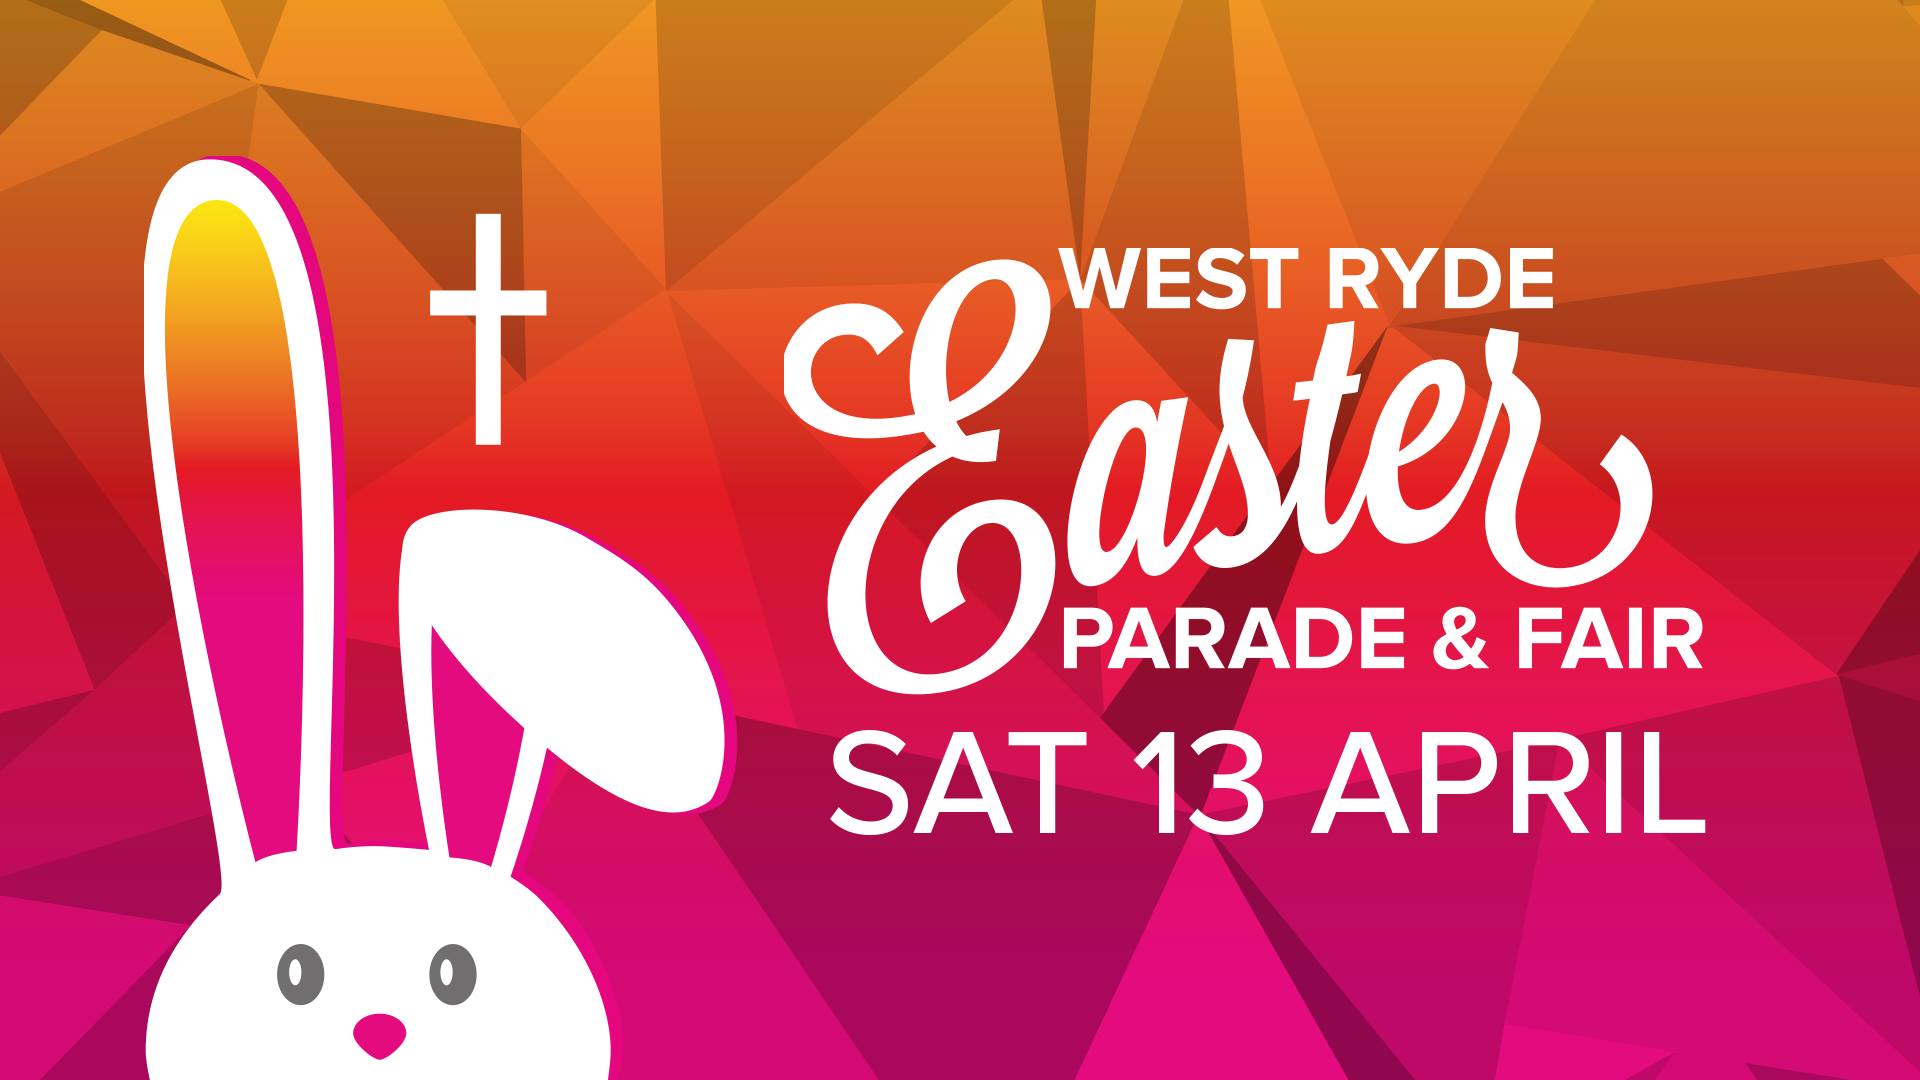 West Ryde Easter Parade and Fair